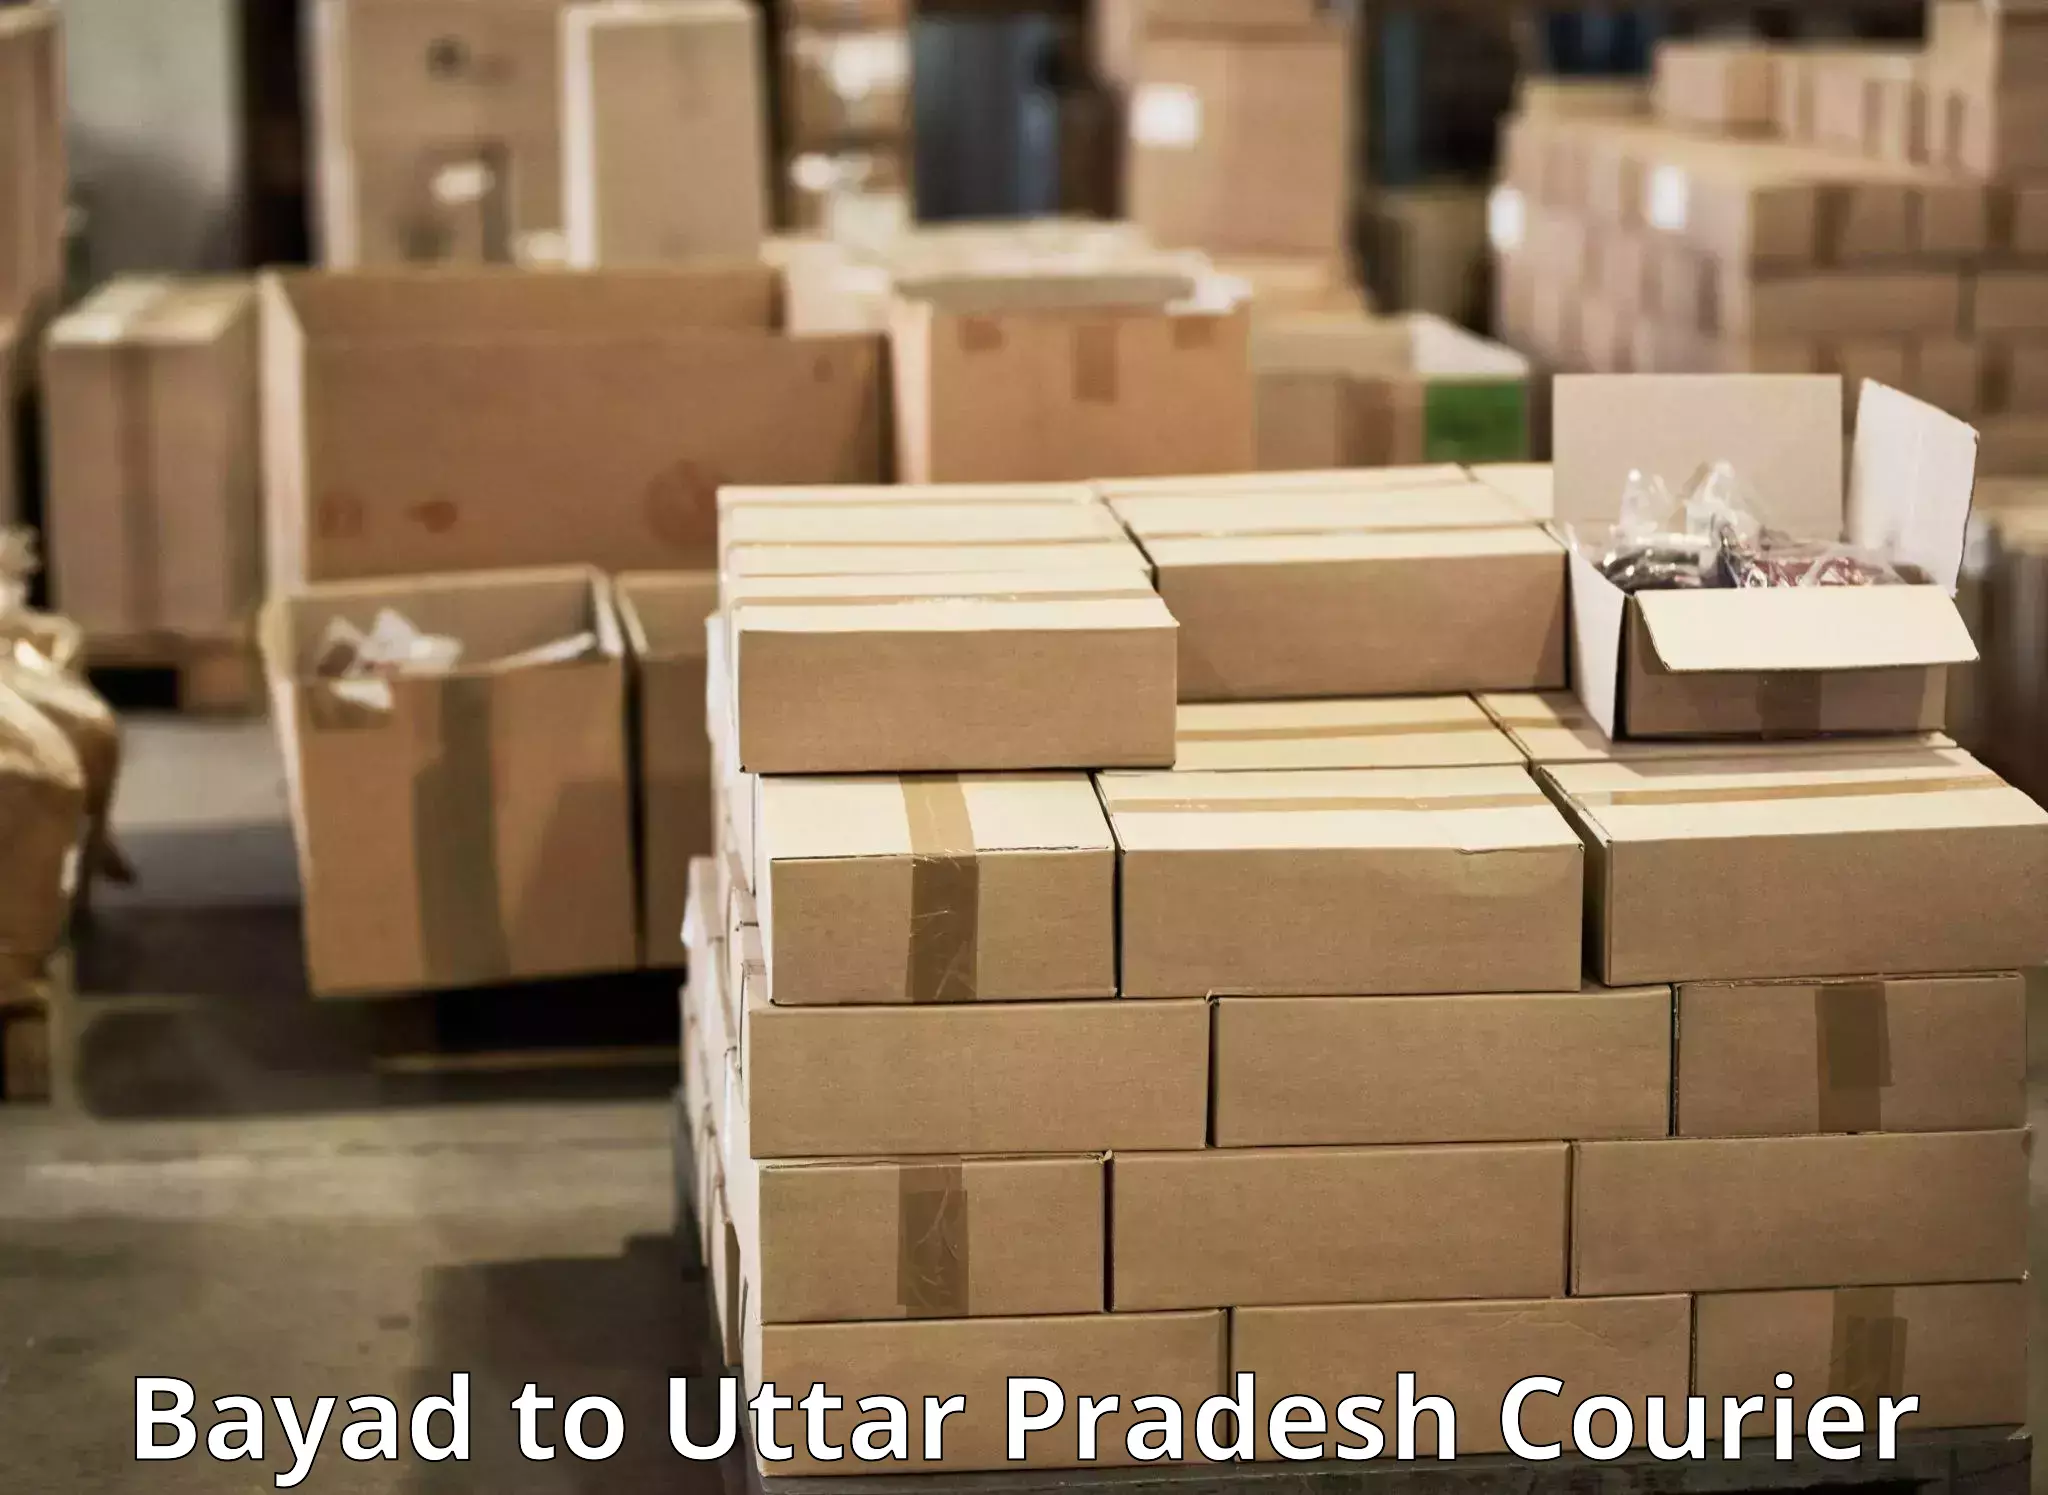 Postal and courier services Bayad to Aligarh Muslim University